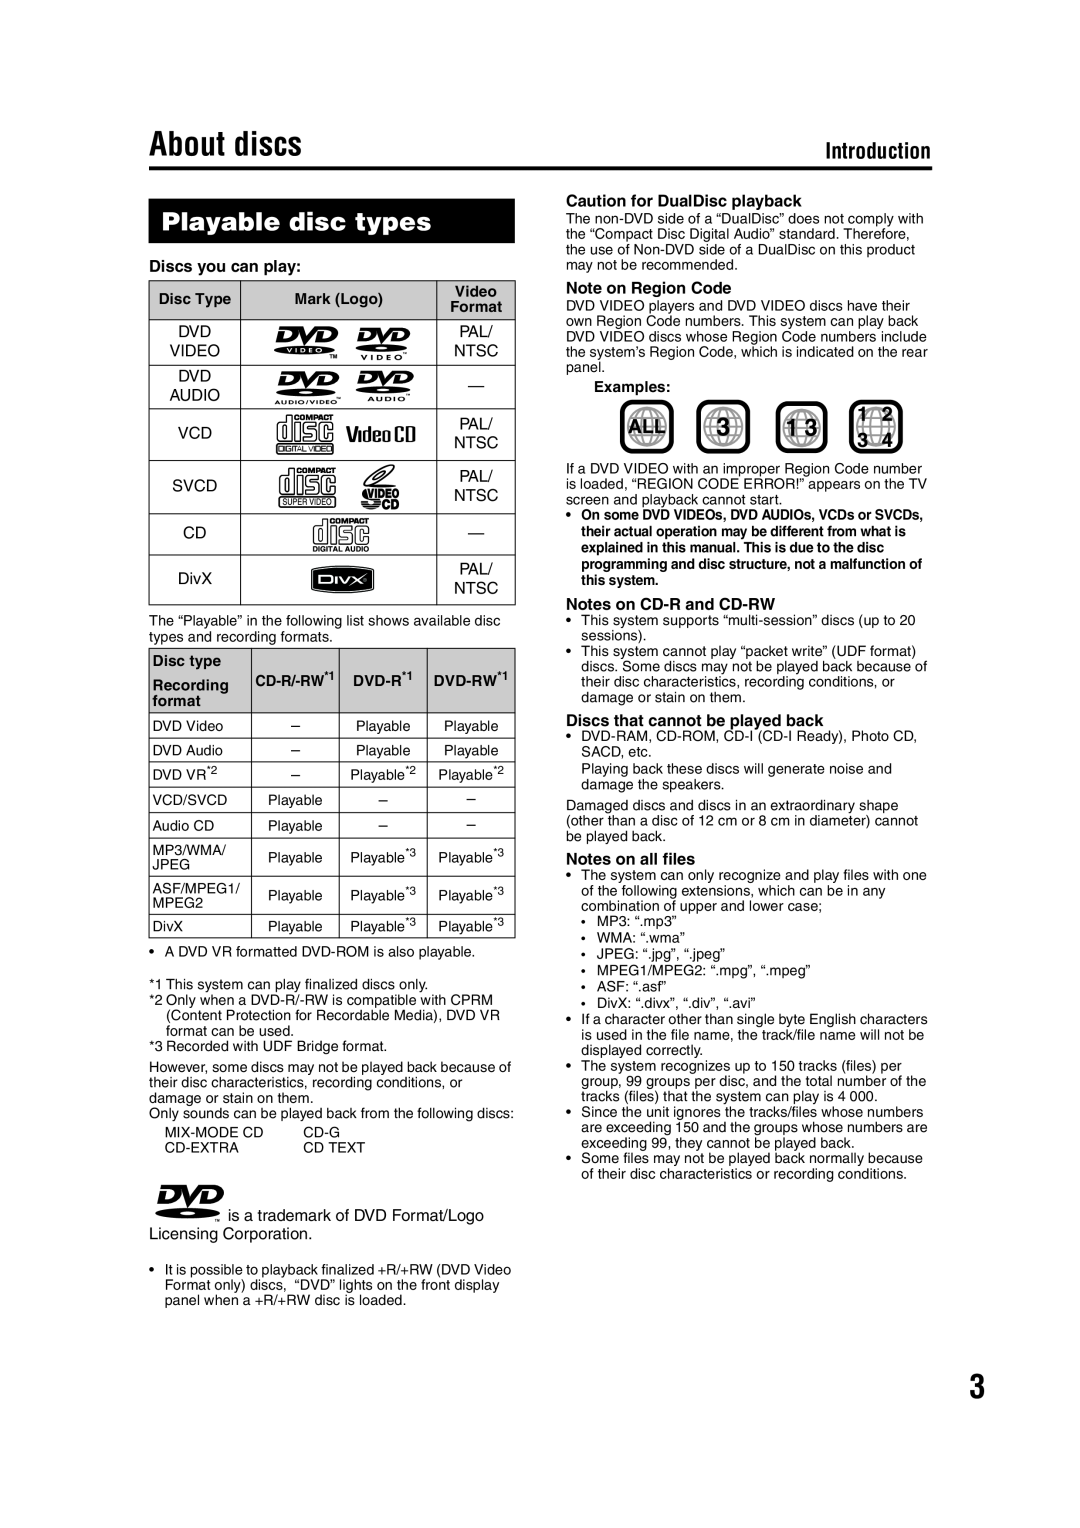 JVC EX-D11 manual About discs, Playable disc types, Introduction, Discs you can play, Caution for DualDisc playback 